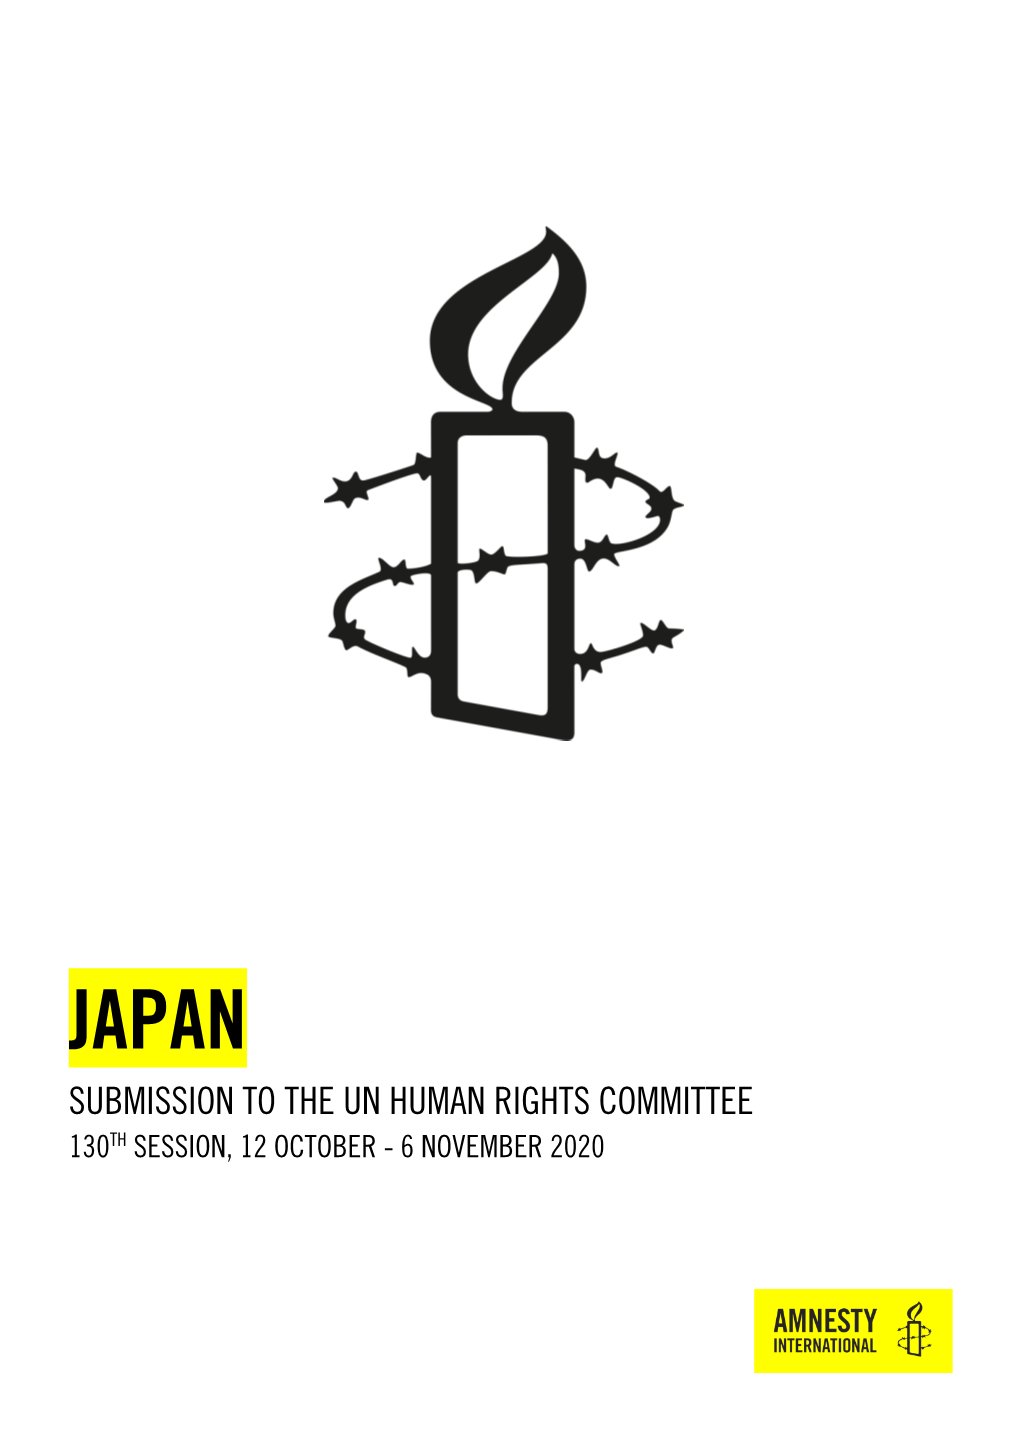 Japan Submission to the Un Human Rights Committee 130Th Session, 12 October - 6 November 2020